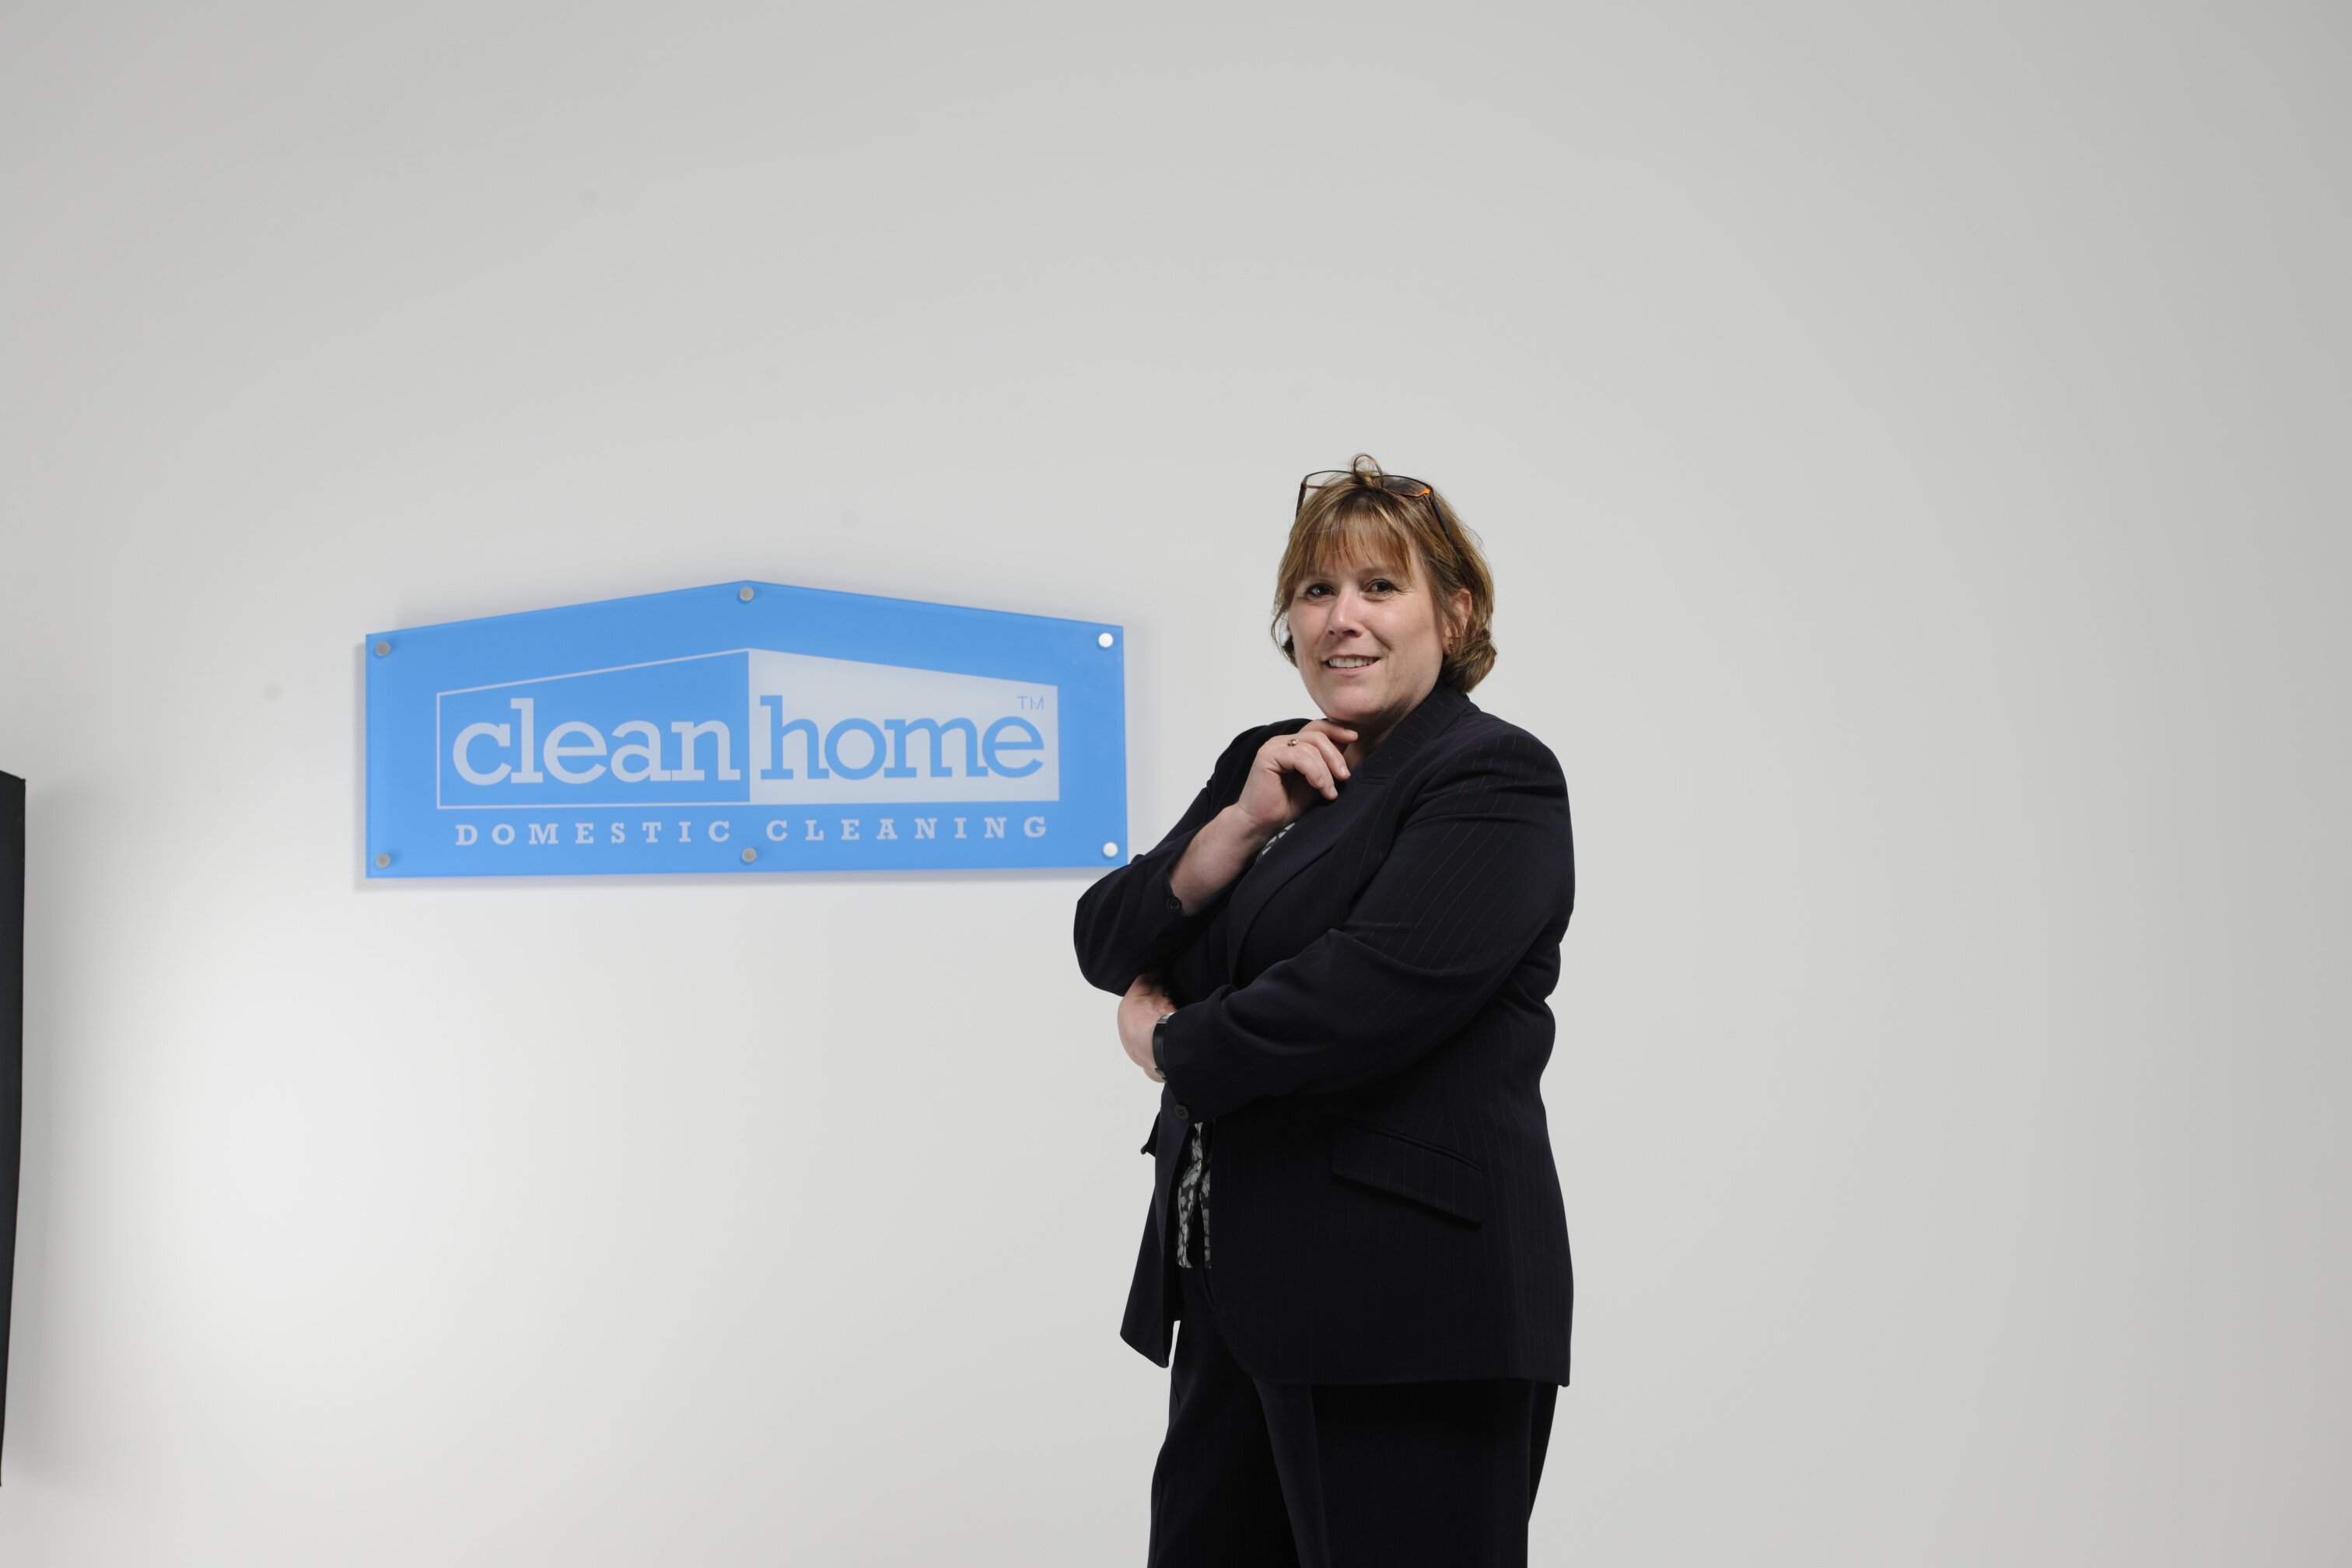 Owner and Founder of @Cleanhomeuk